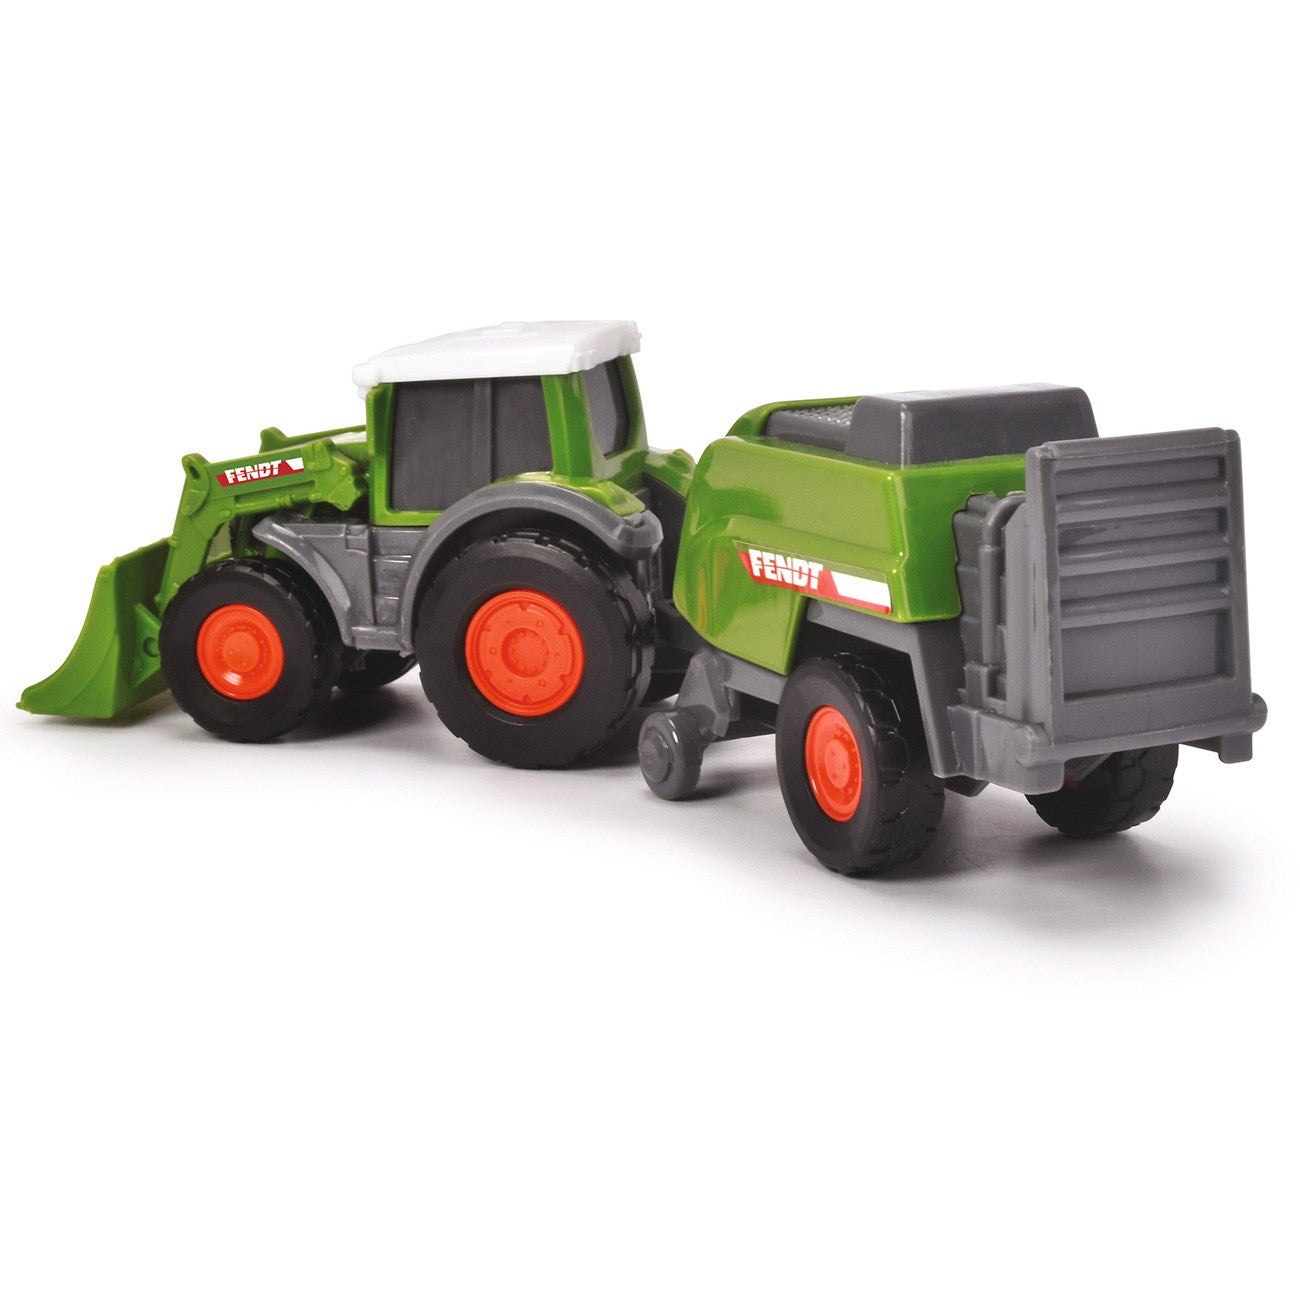 Dickie Toys Fendt tractor set with trailer 5